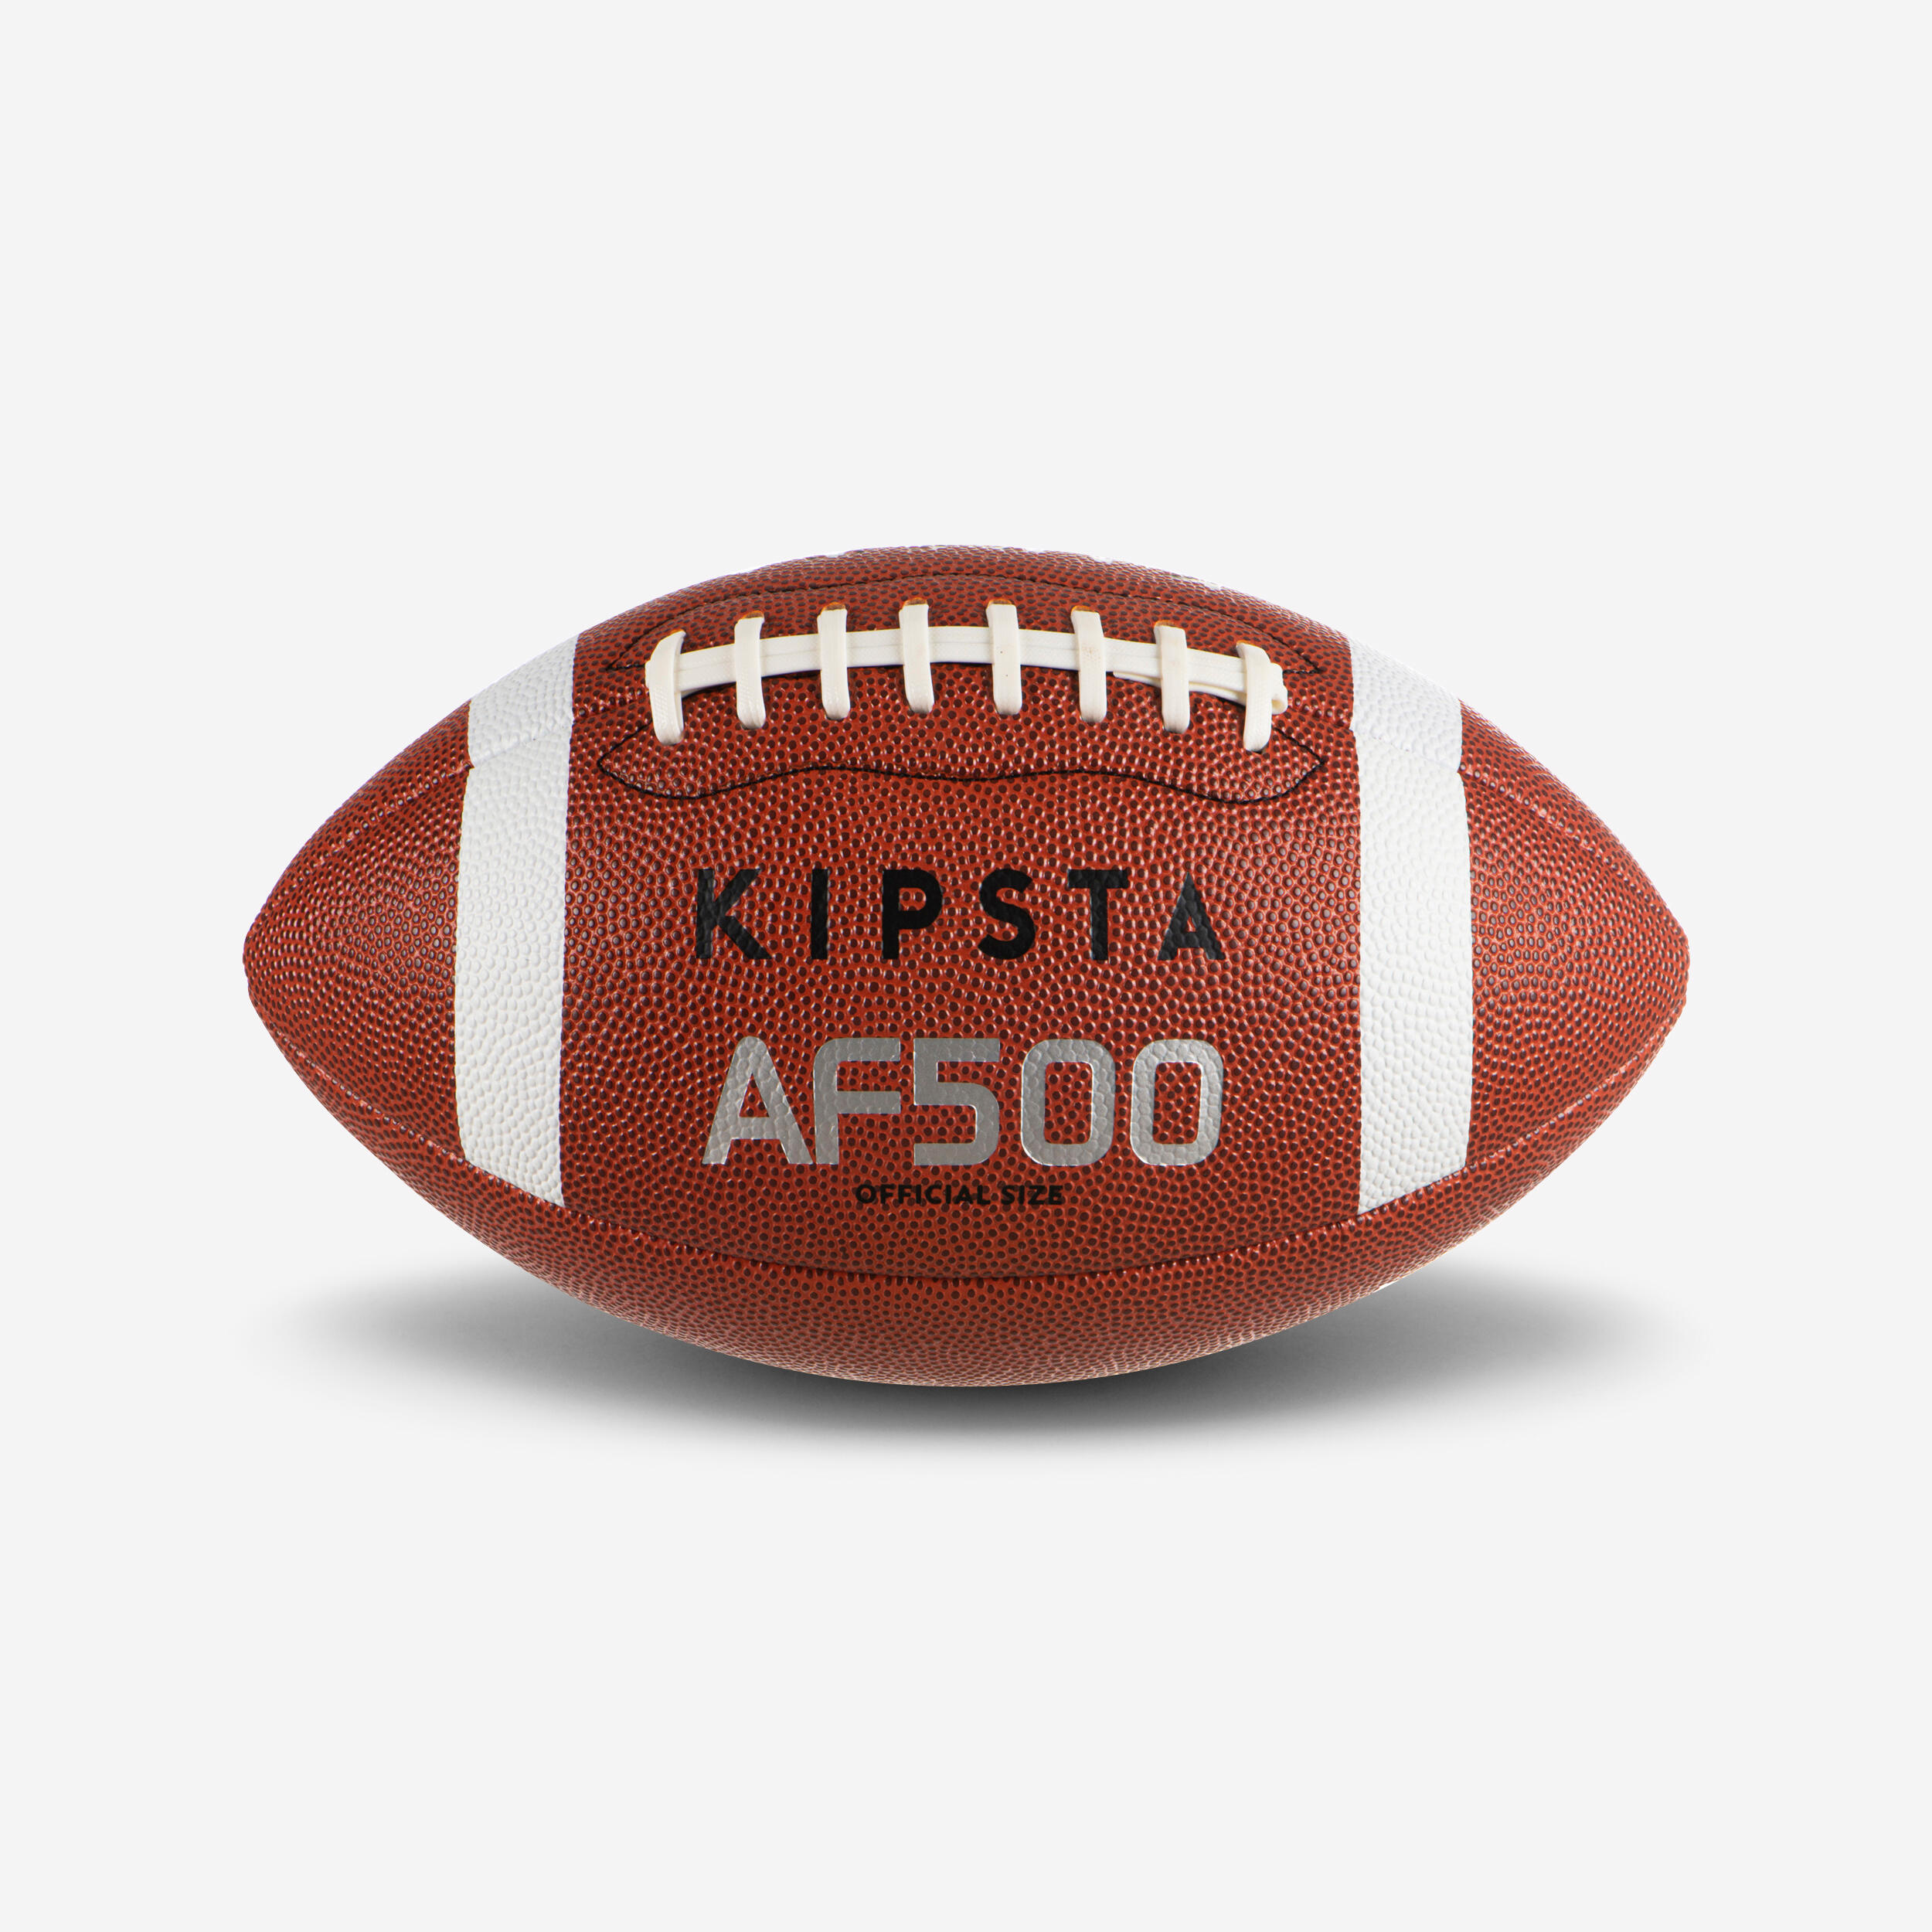 KIPSTA American Football Official Size AF500BOF - Brown